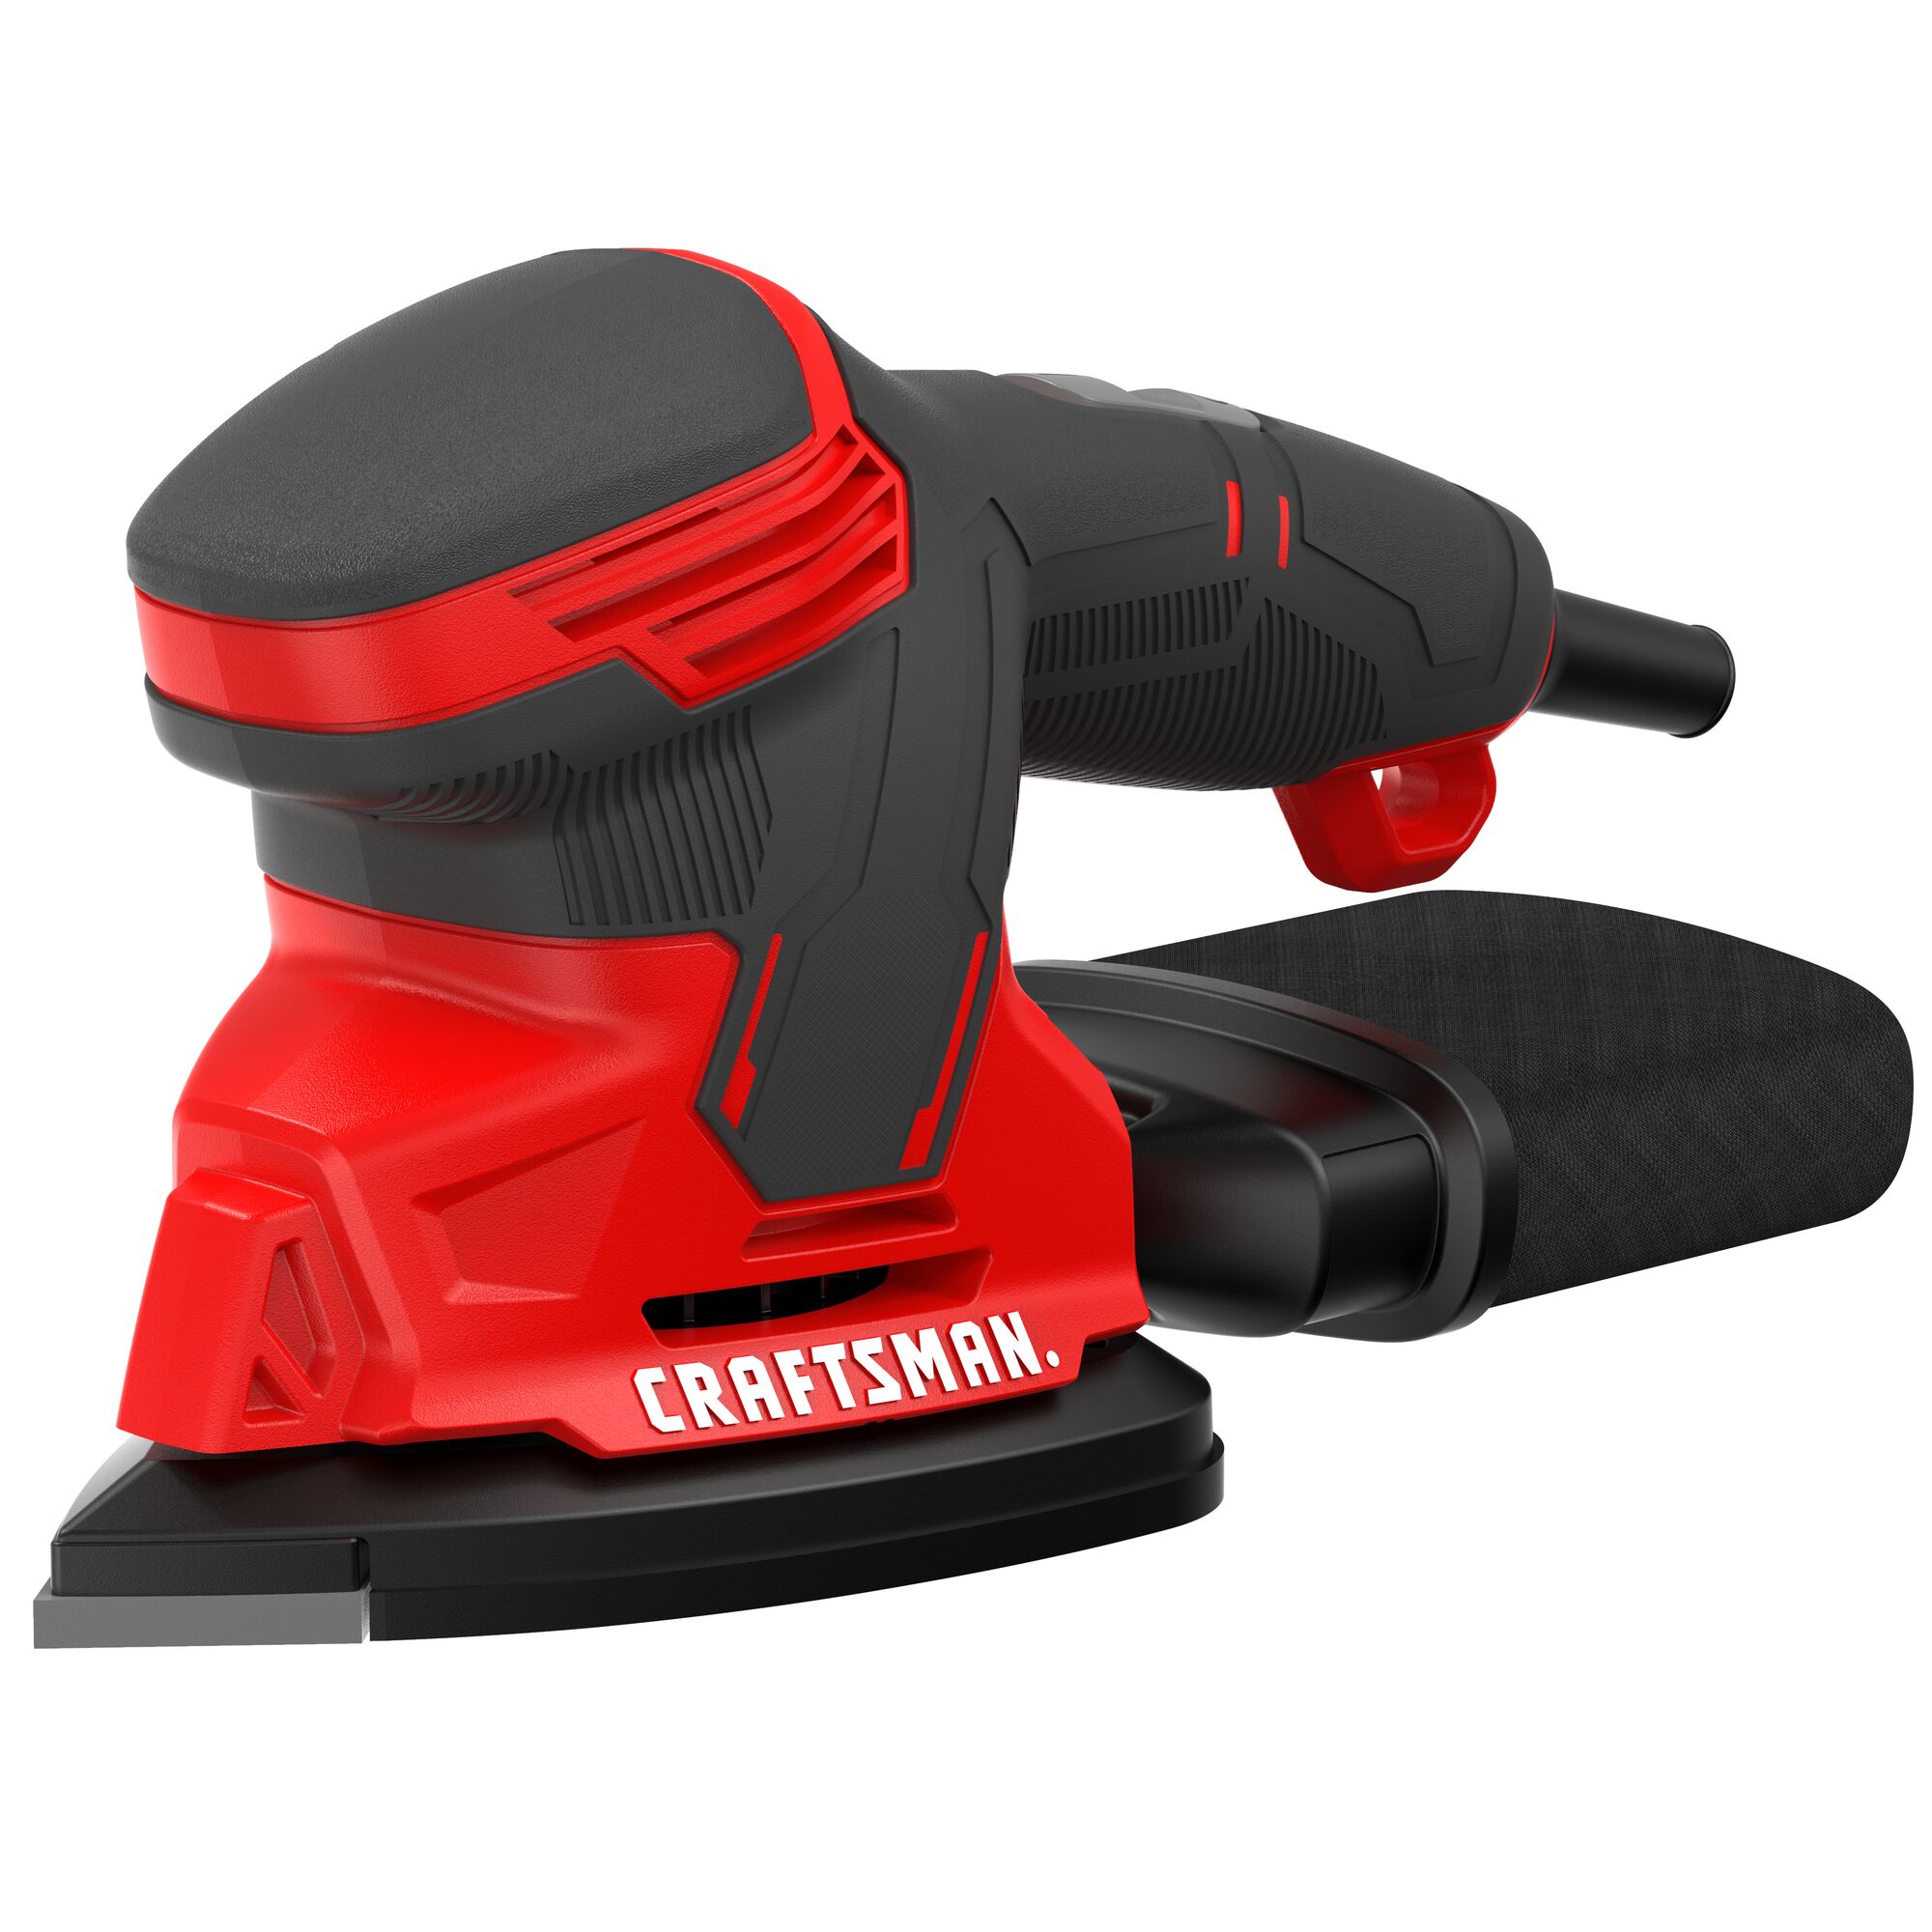 BLACK+DECKER 1.2-Amp Corded Detail Sander with Dust Management in the Power  Sanders department at